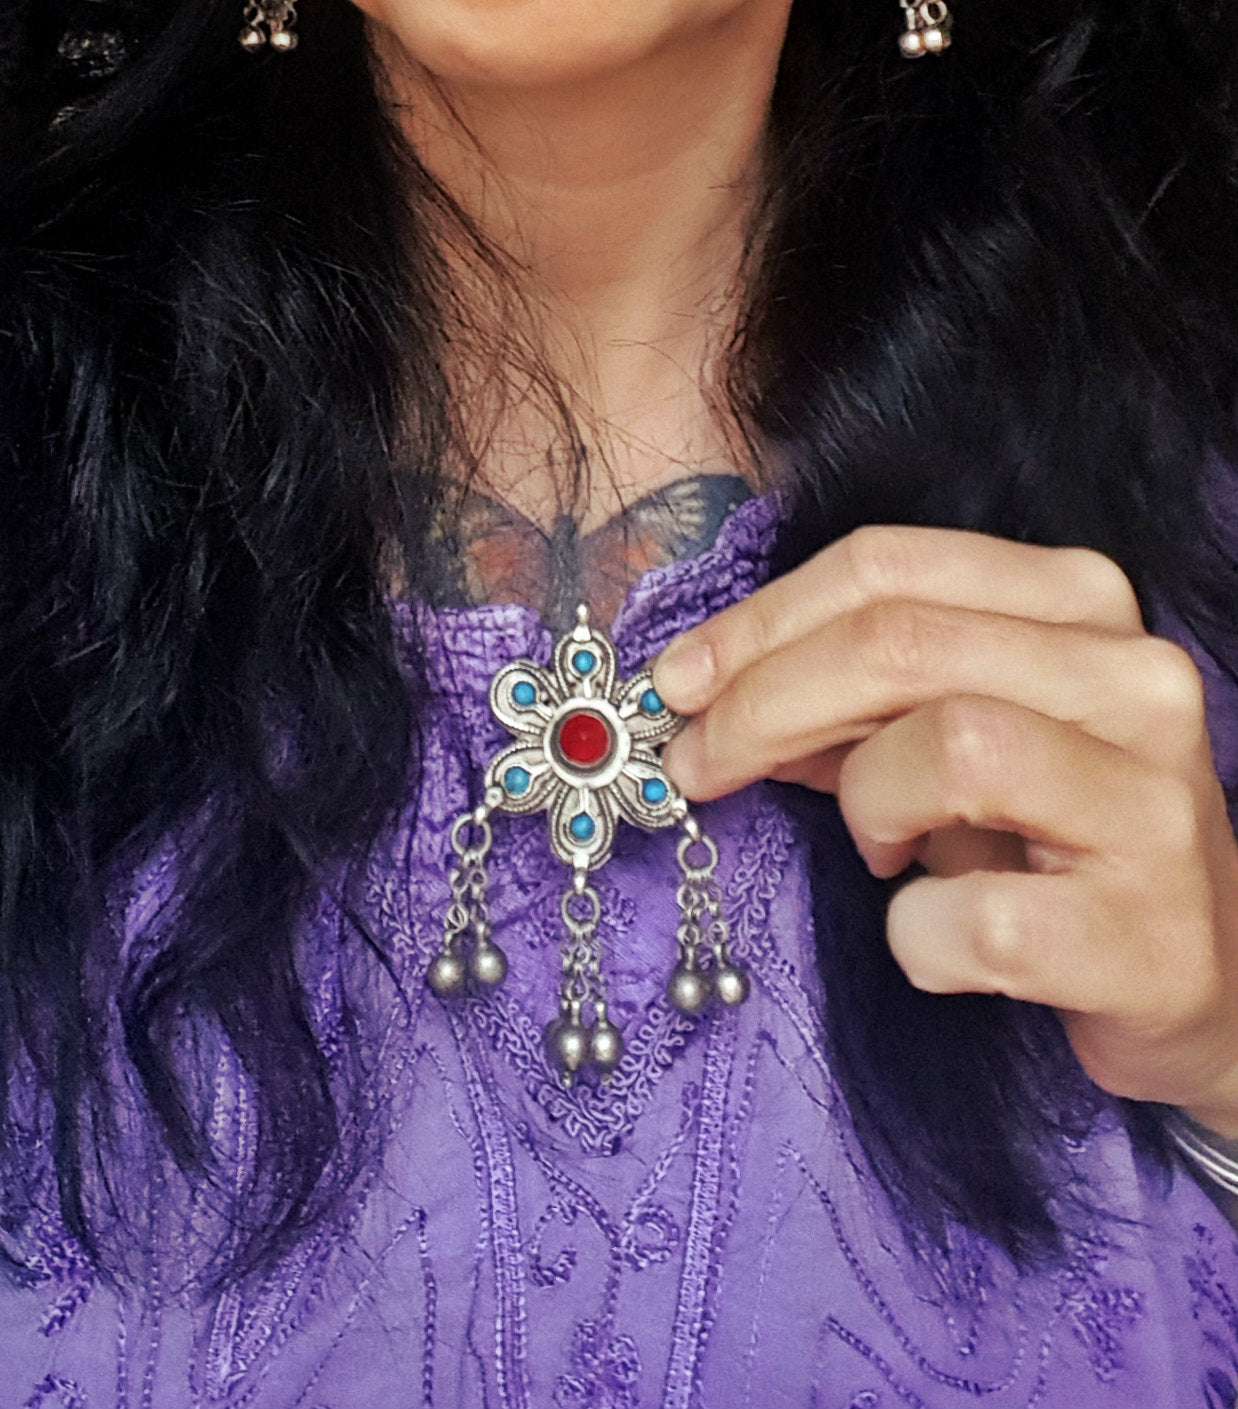 Antique Afghani Flower Pendant with Bells